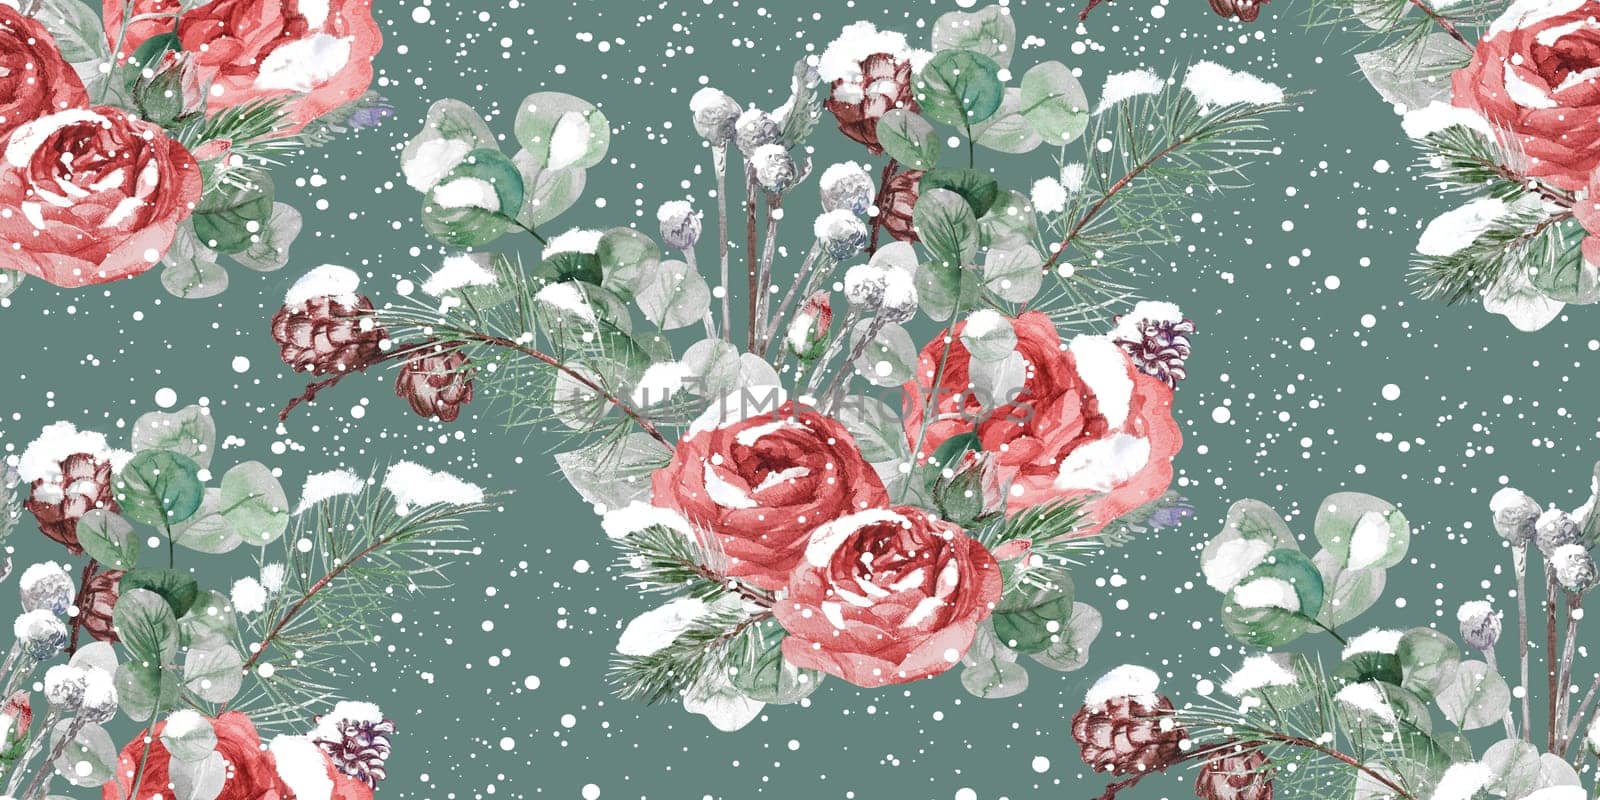 Christmas winter seamless pattern painted in watercolor with red roses and snow in vintage style for package and surface design